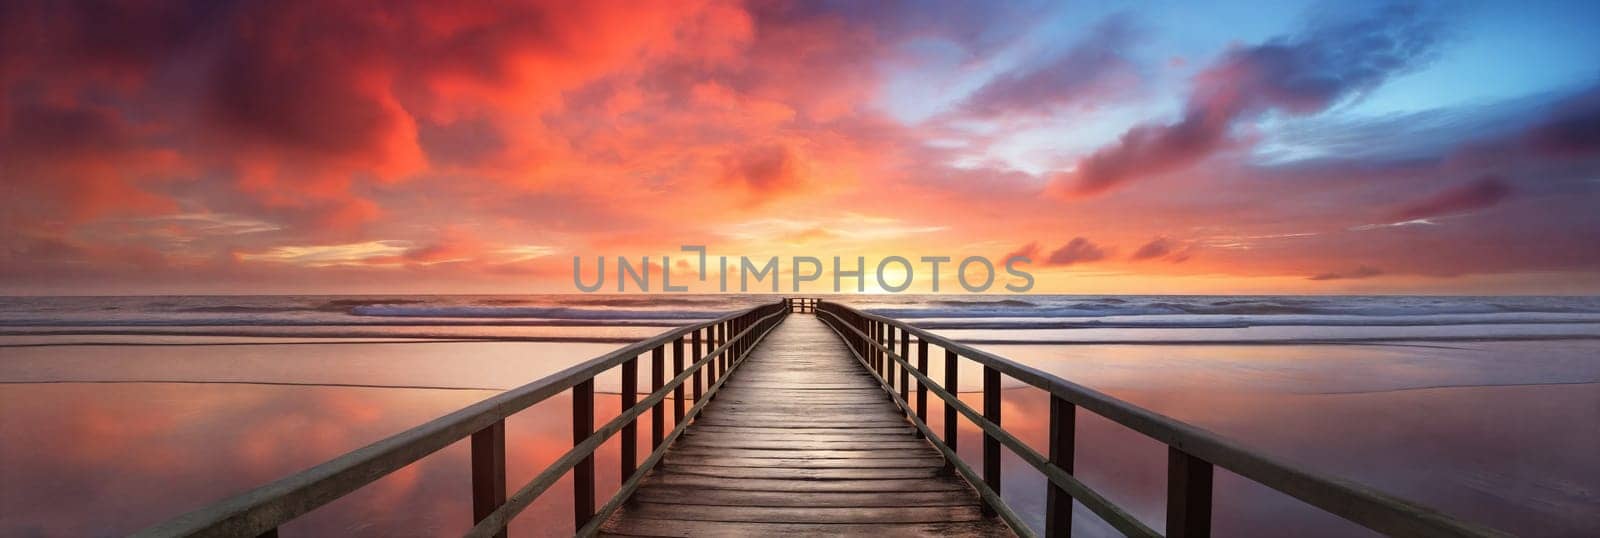 A tranquil scene of a wooden jetty stretching out into the golden sea, framed by a stunning sunset sky